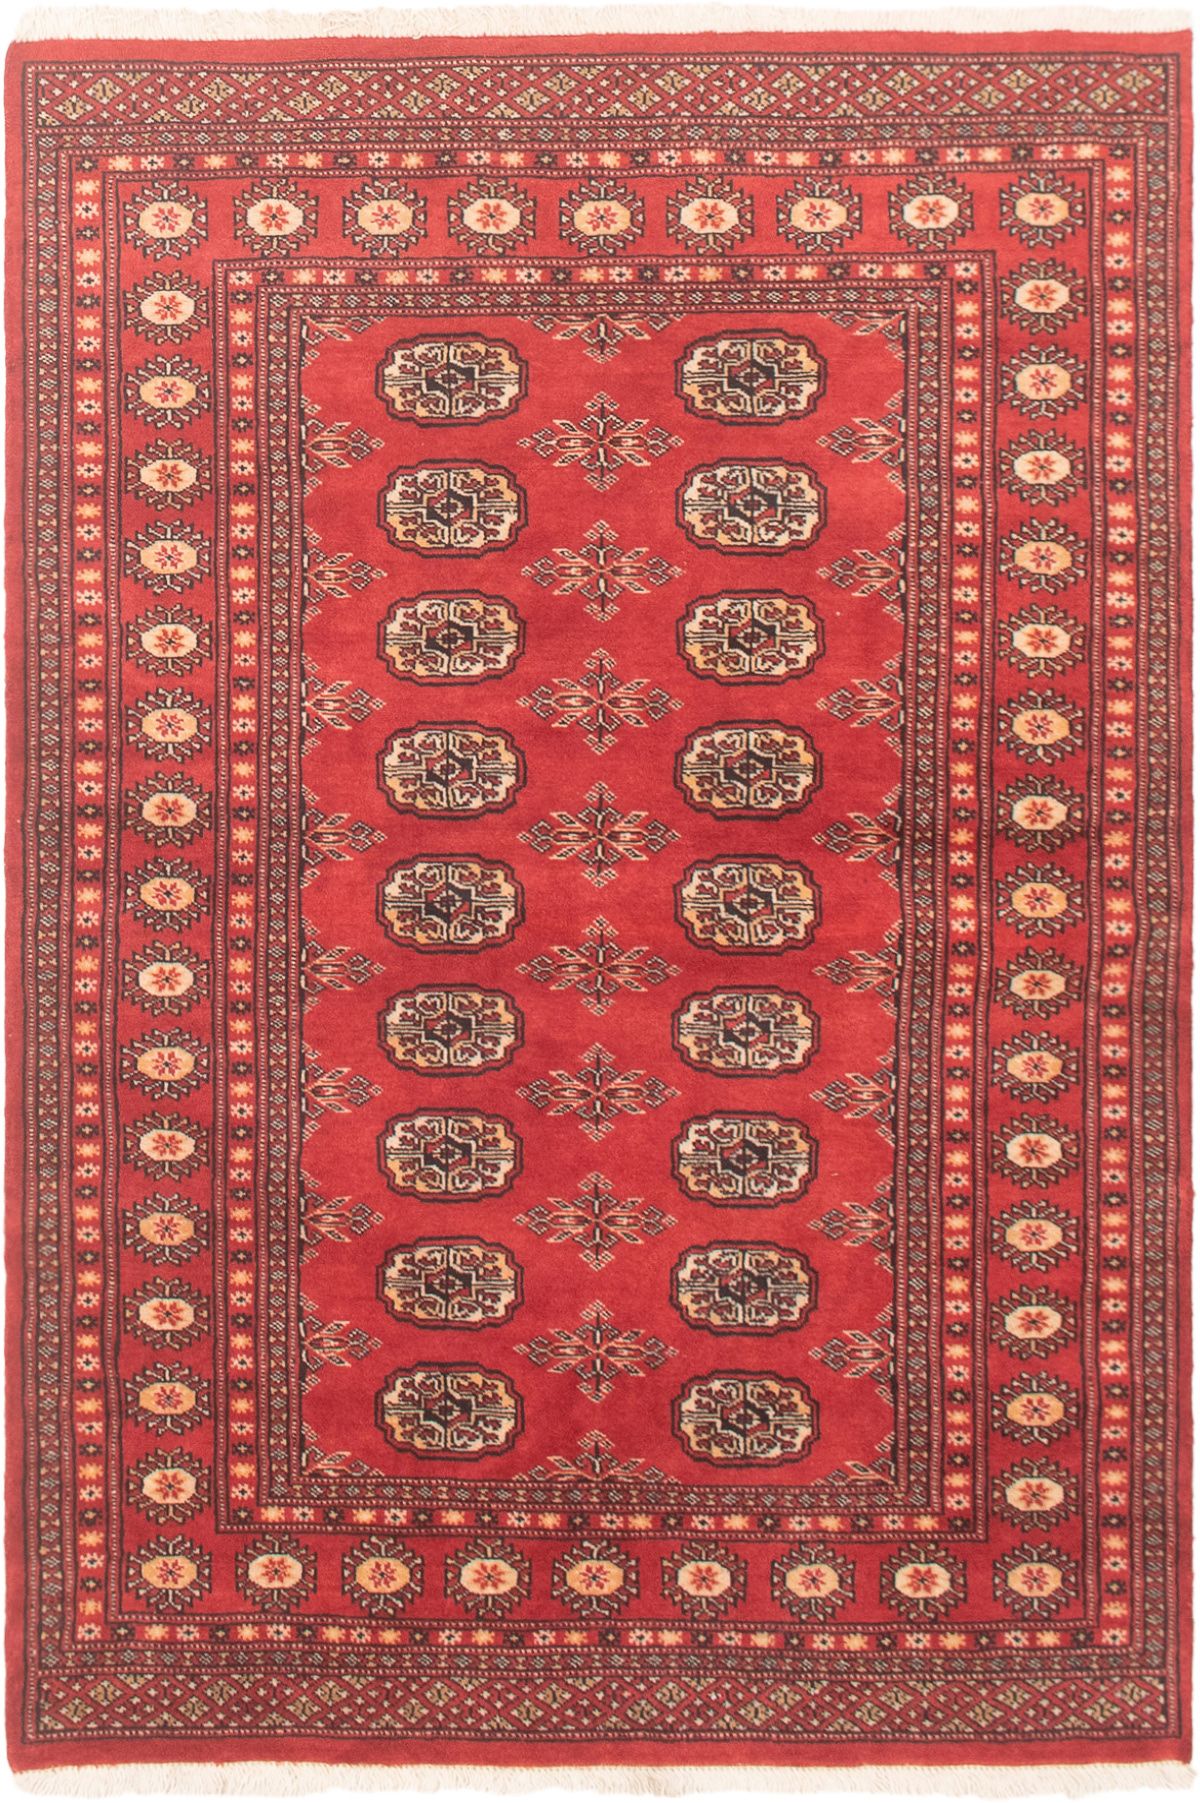 Hand-knotted Finest Peshawar Bokhara Red Wool Rug 3'11" x 5'11" Size: 3'11" x 5'11"  